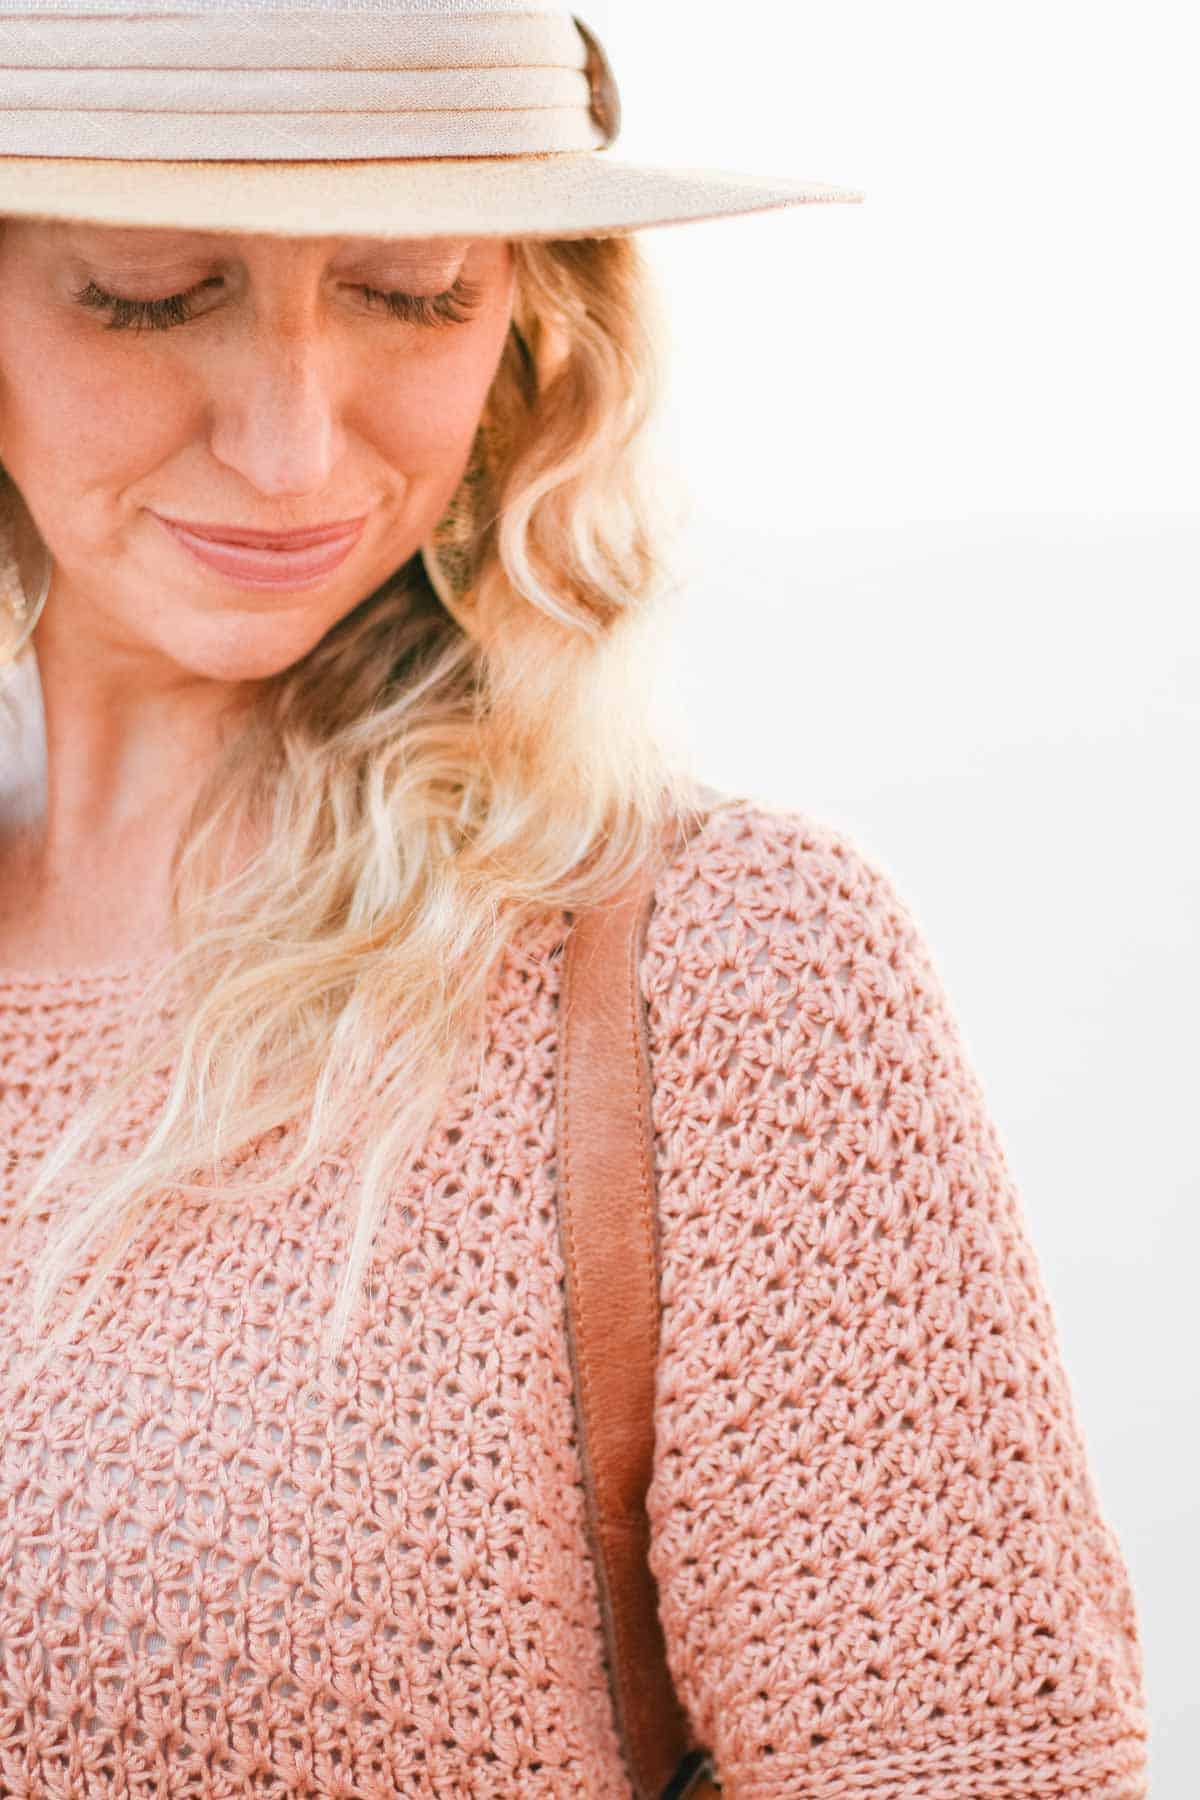 This image shows a woman facing the camera, looking down. It is a close up of her face and shoulder. She is wearing a pink crochet tunic and has blonde hair.